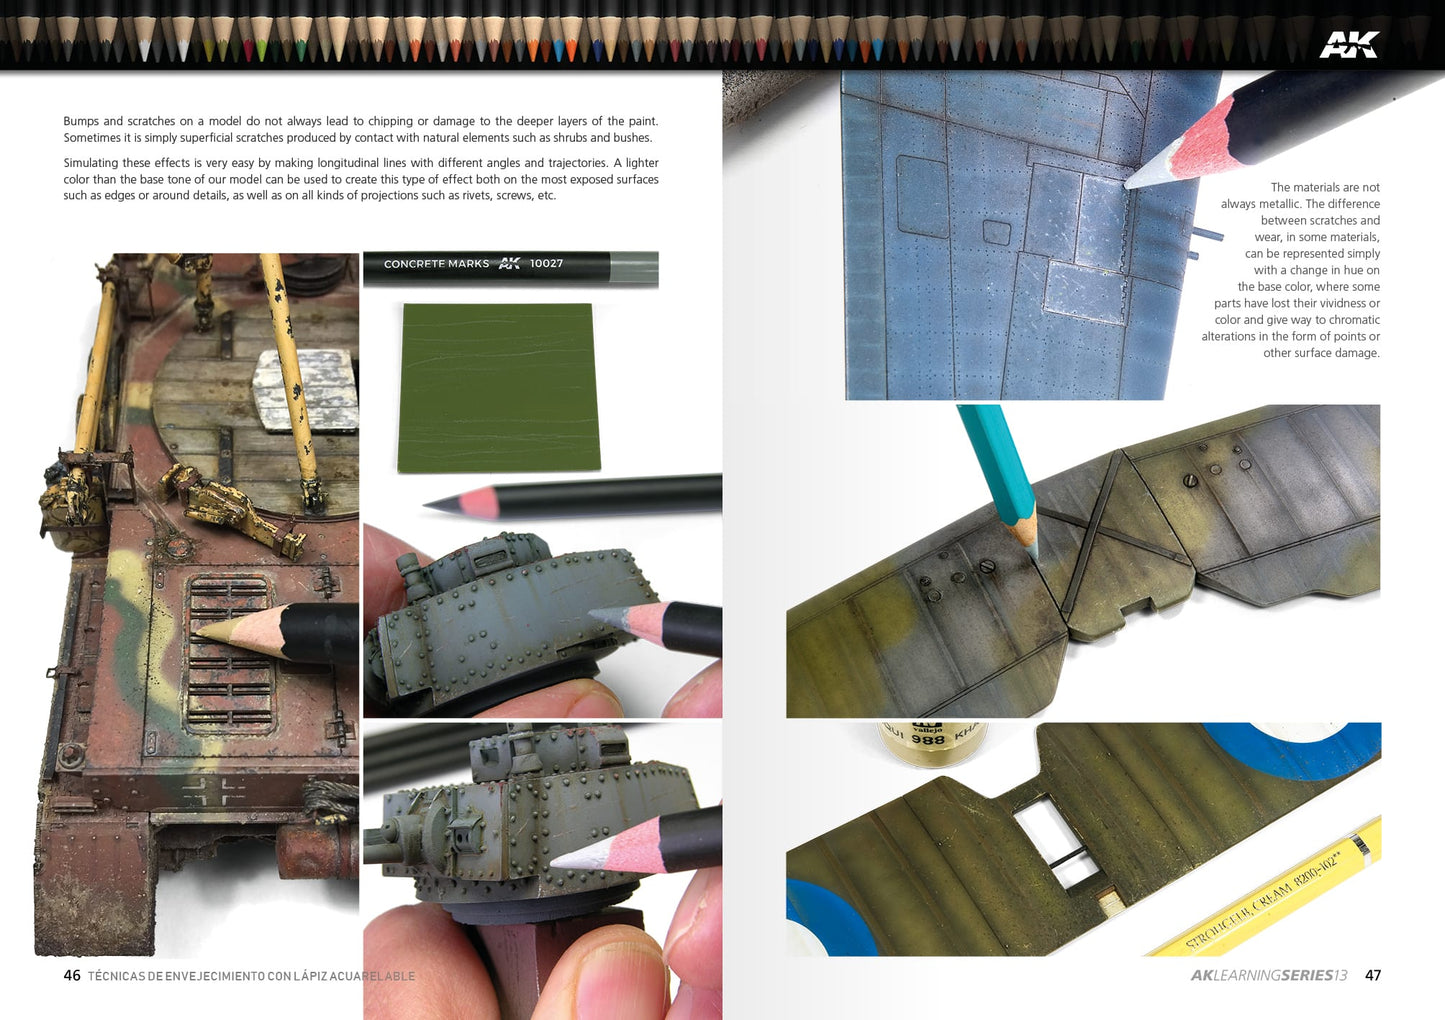 AK Interactive Learning Series 13 - Weathering Pencil Techniques